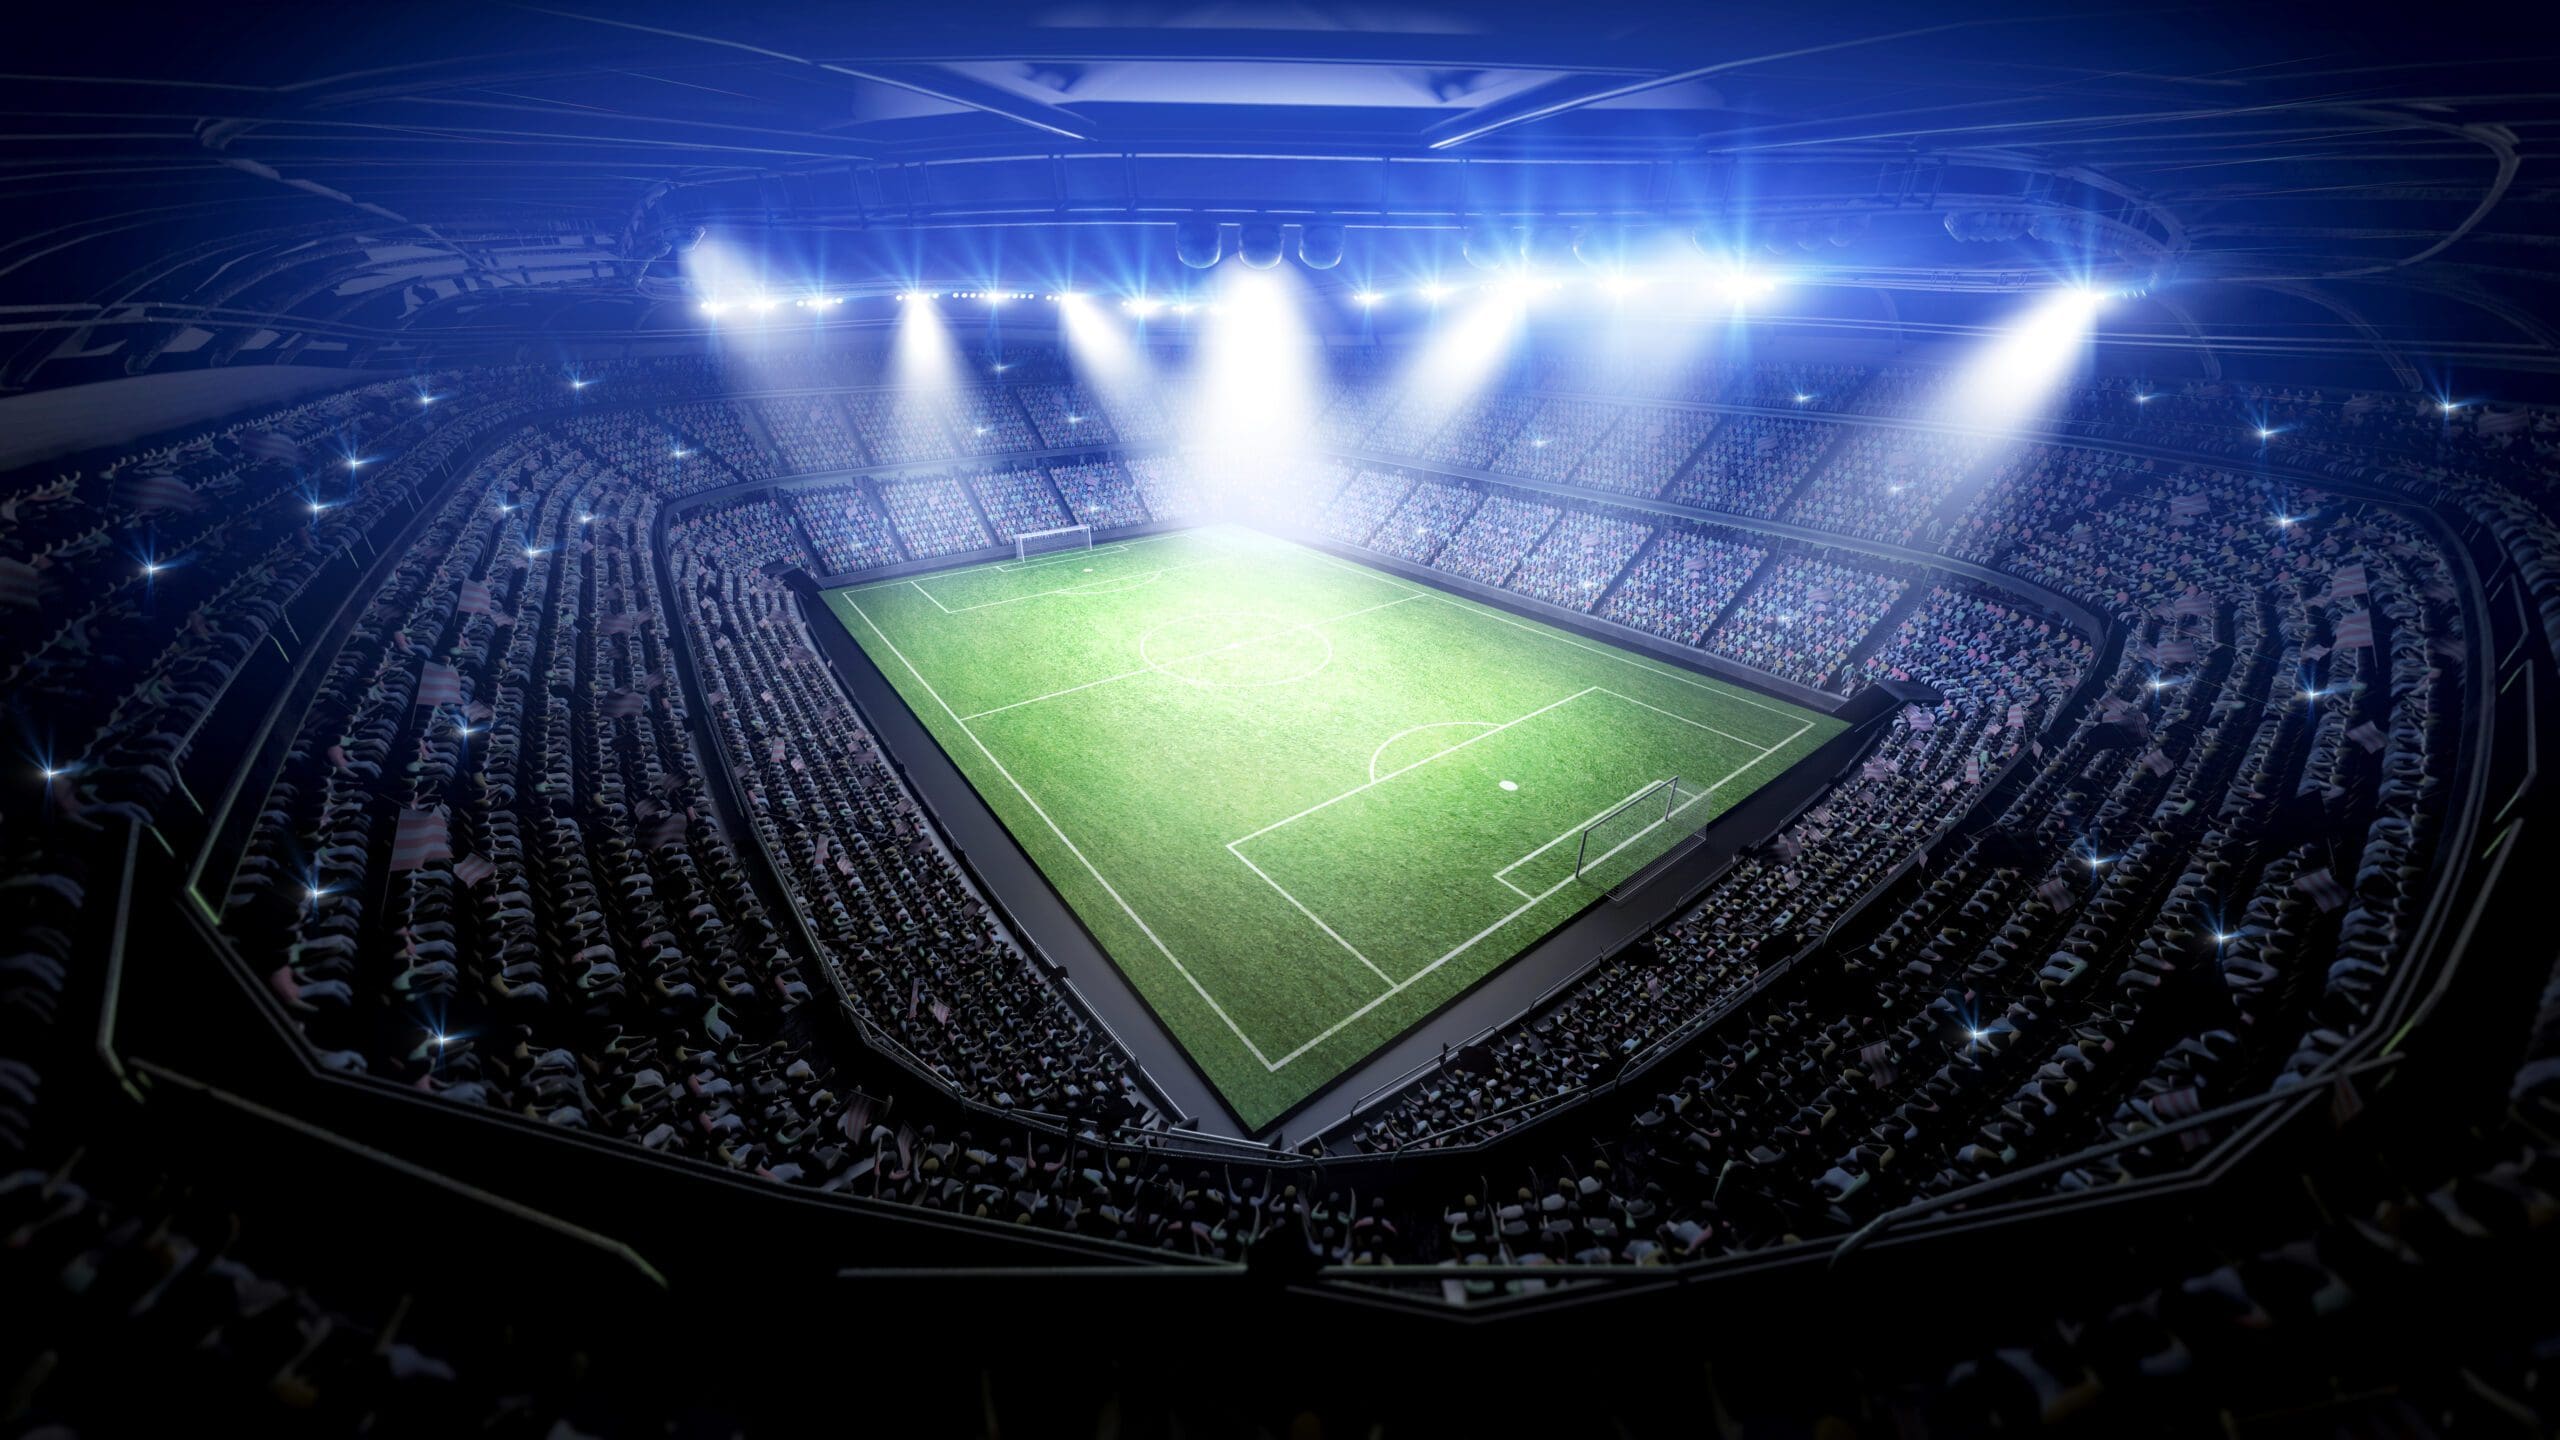 Soccer stadium at night with lights shining down